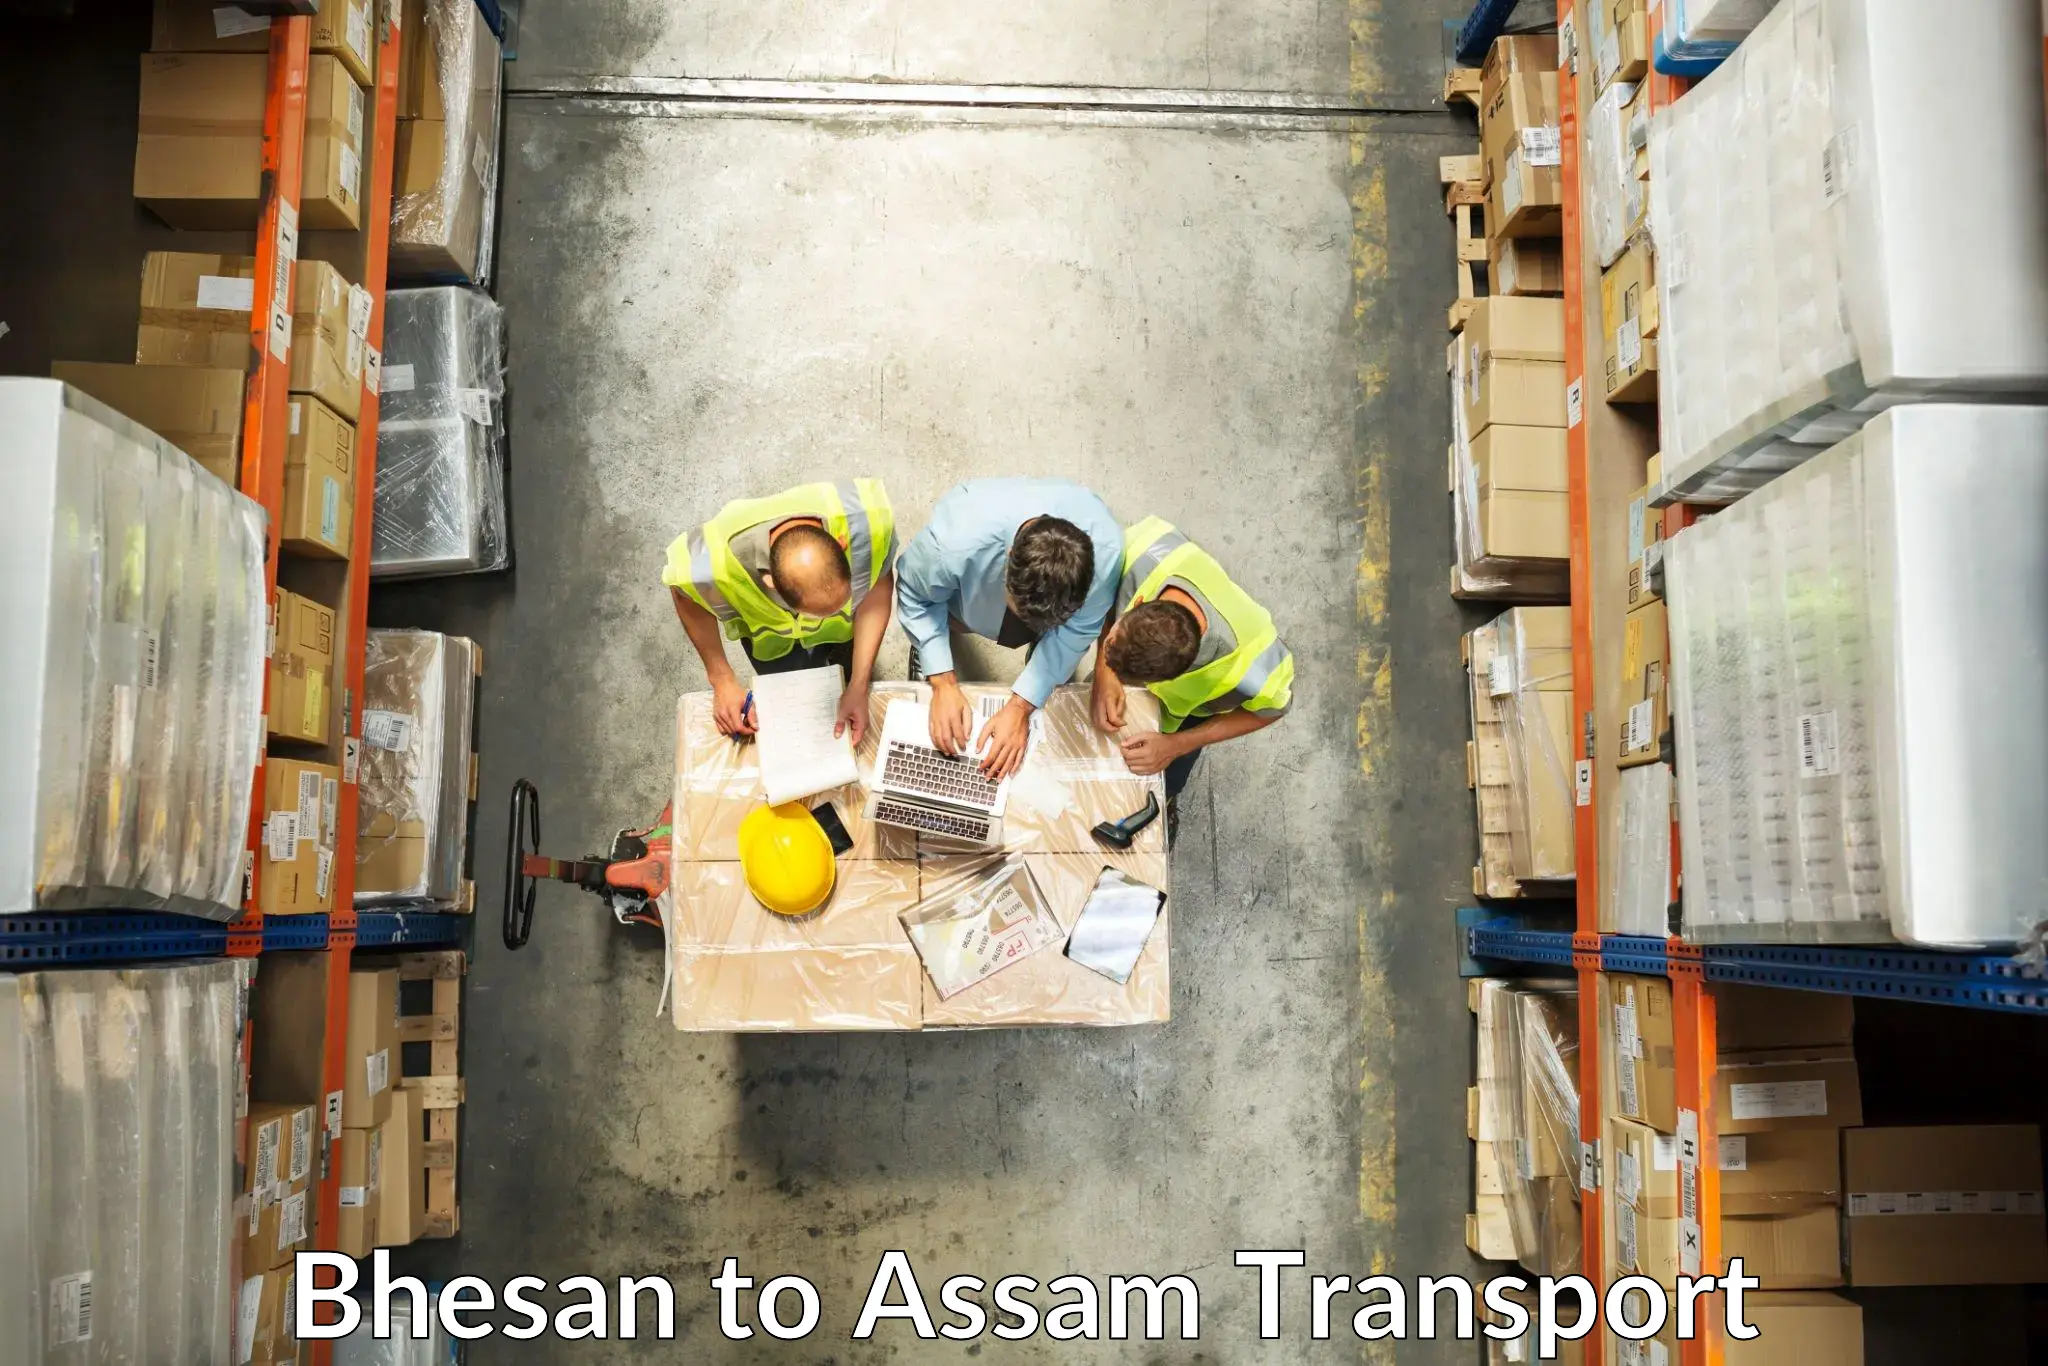 Truck transport companies in India Bhesan to Assam